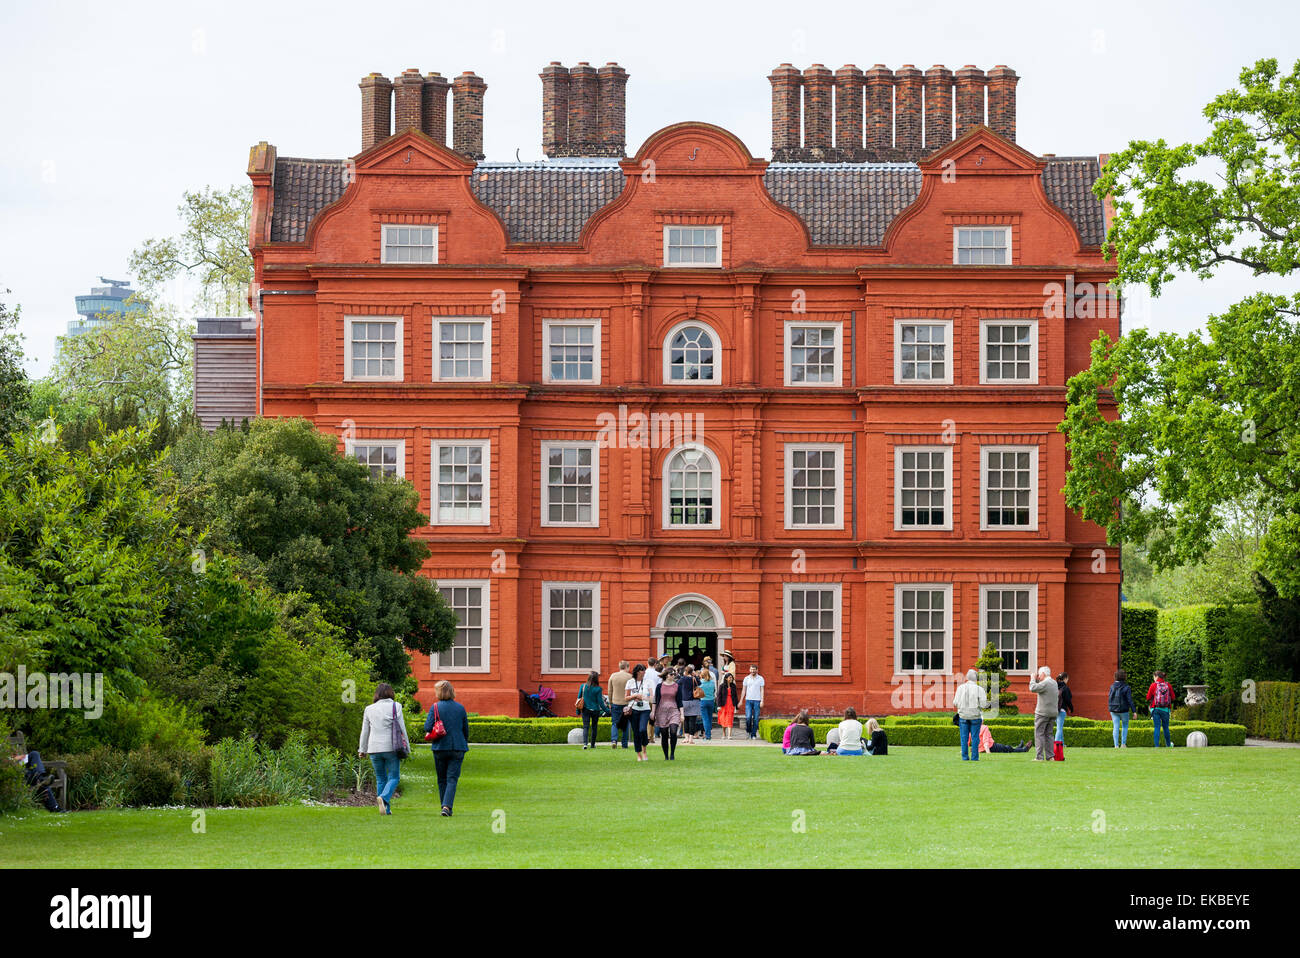 Kew Palace, also known as The Dutch House, a British Royal Palace in Kew Gardens, UNESCO, Kew, Greater London, England, UK Stock Photo